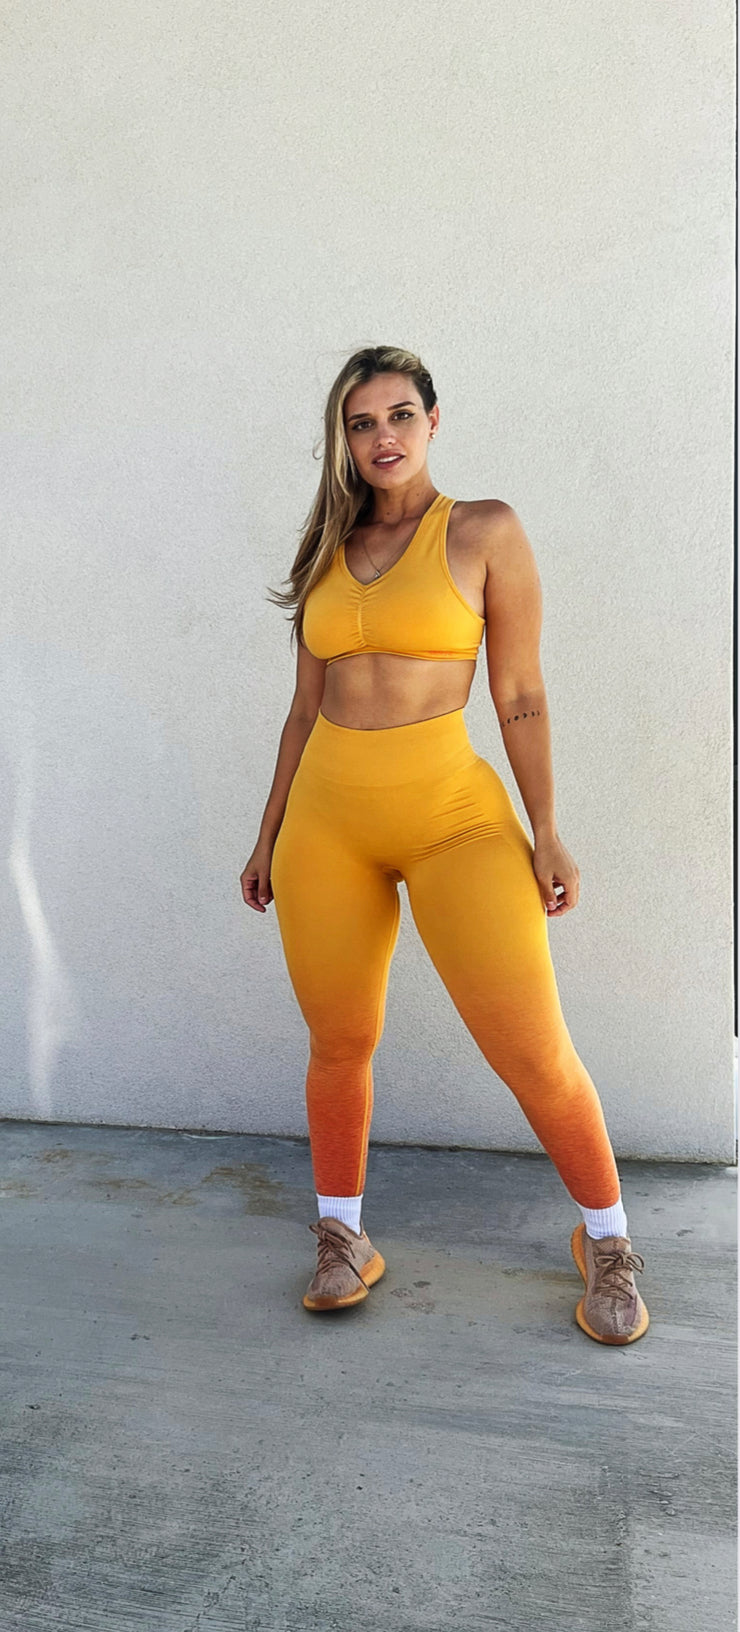 Alphalete Yellow Workout Leggings Size Small - $35 - From Dee